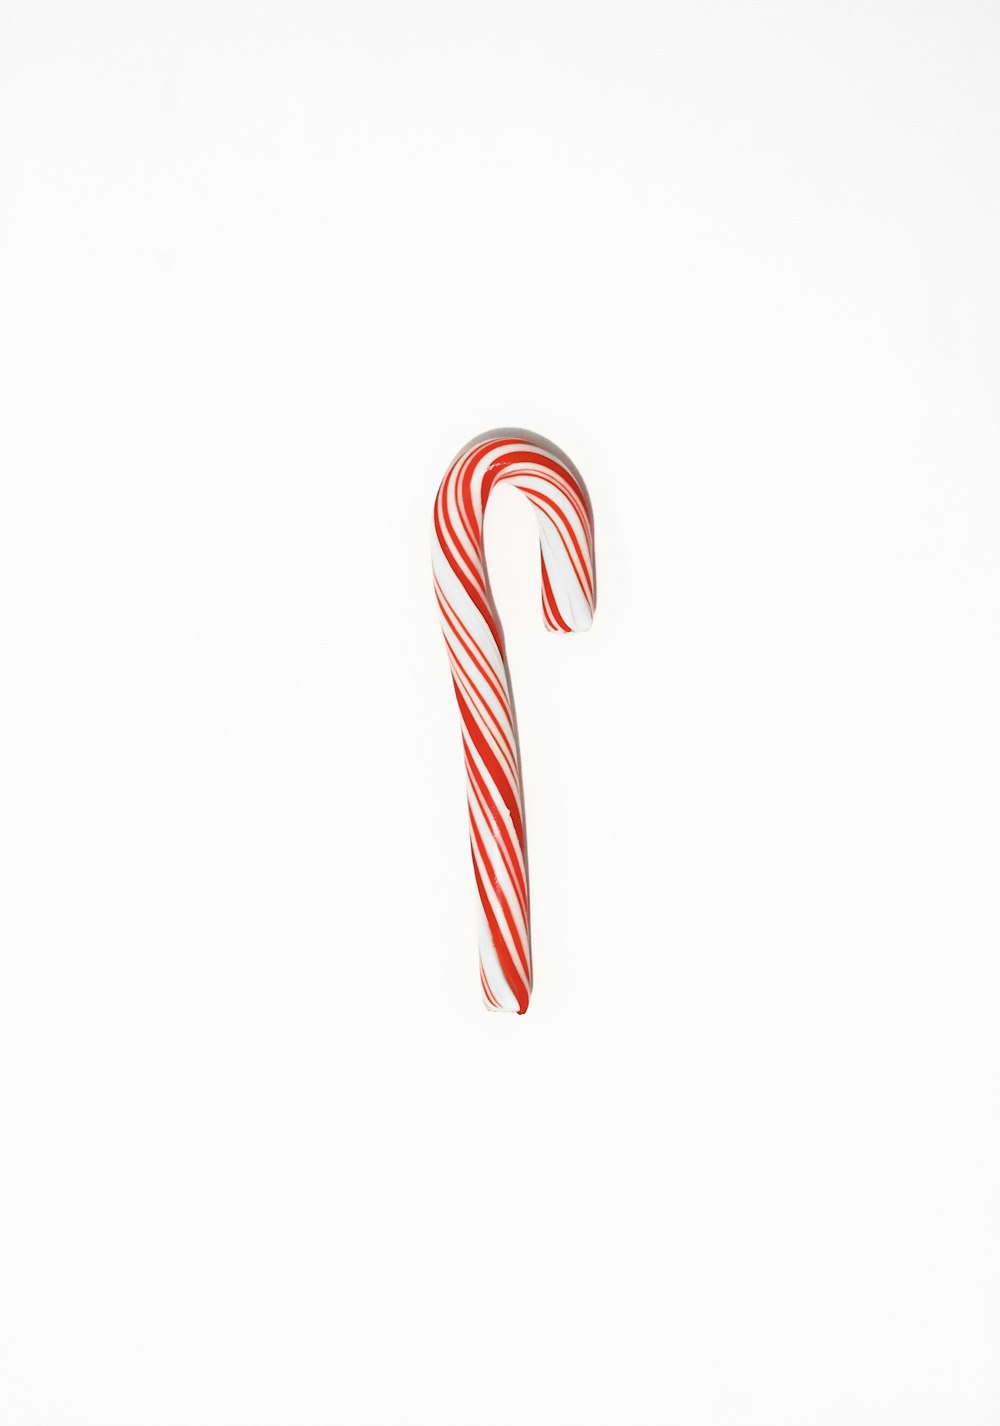 a red and white candy cane on a white background